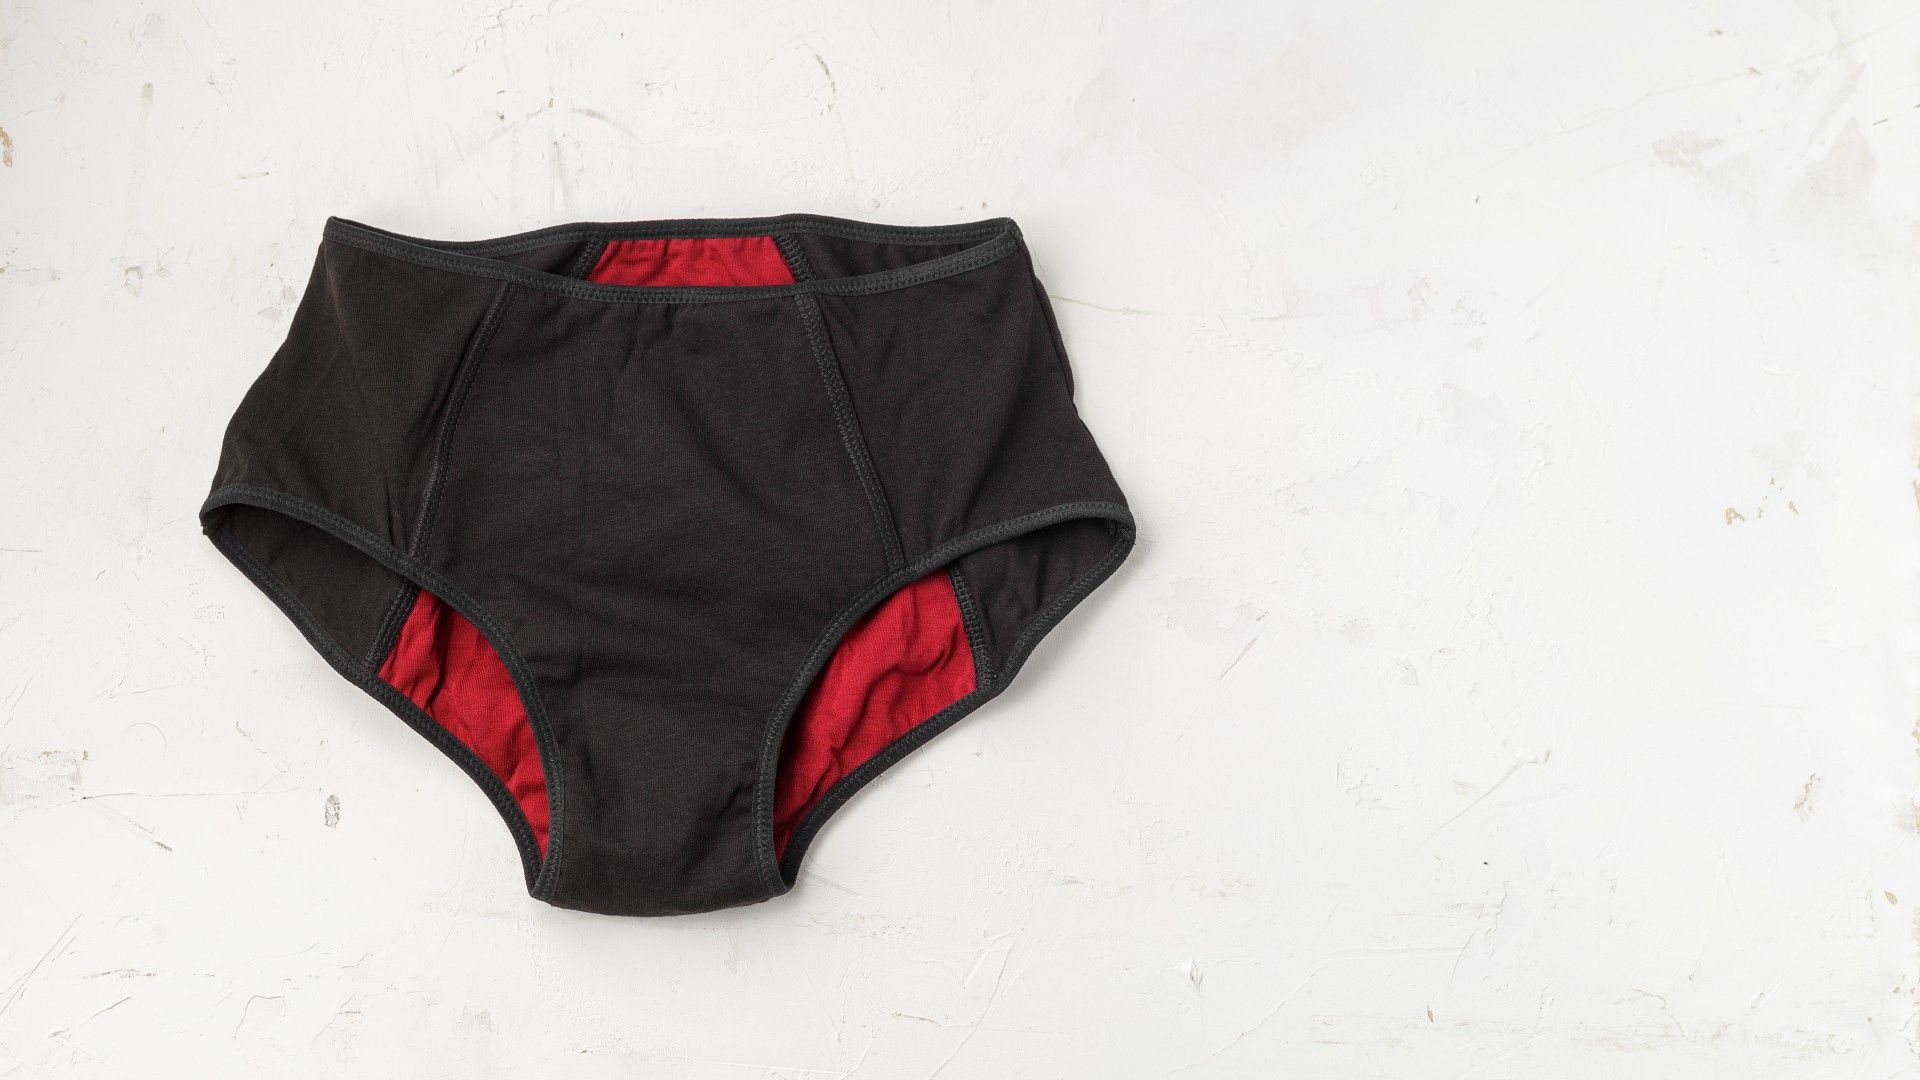 Thinx Toxic Underwear a 'Safety Hazard to the Female Body,' Claims